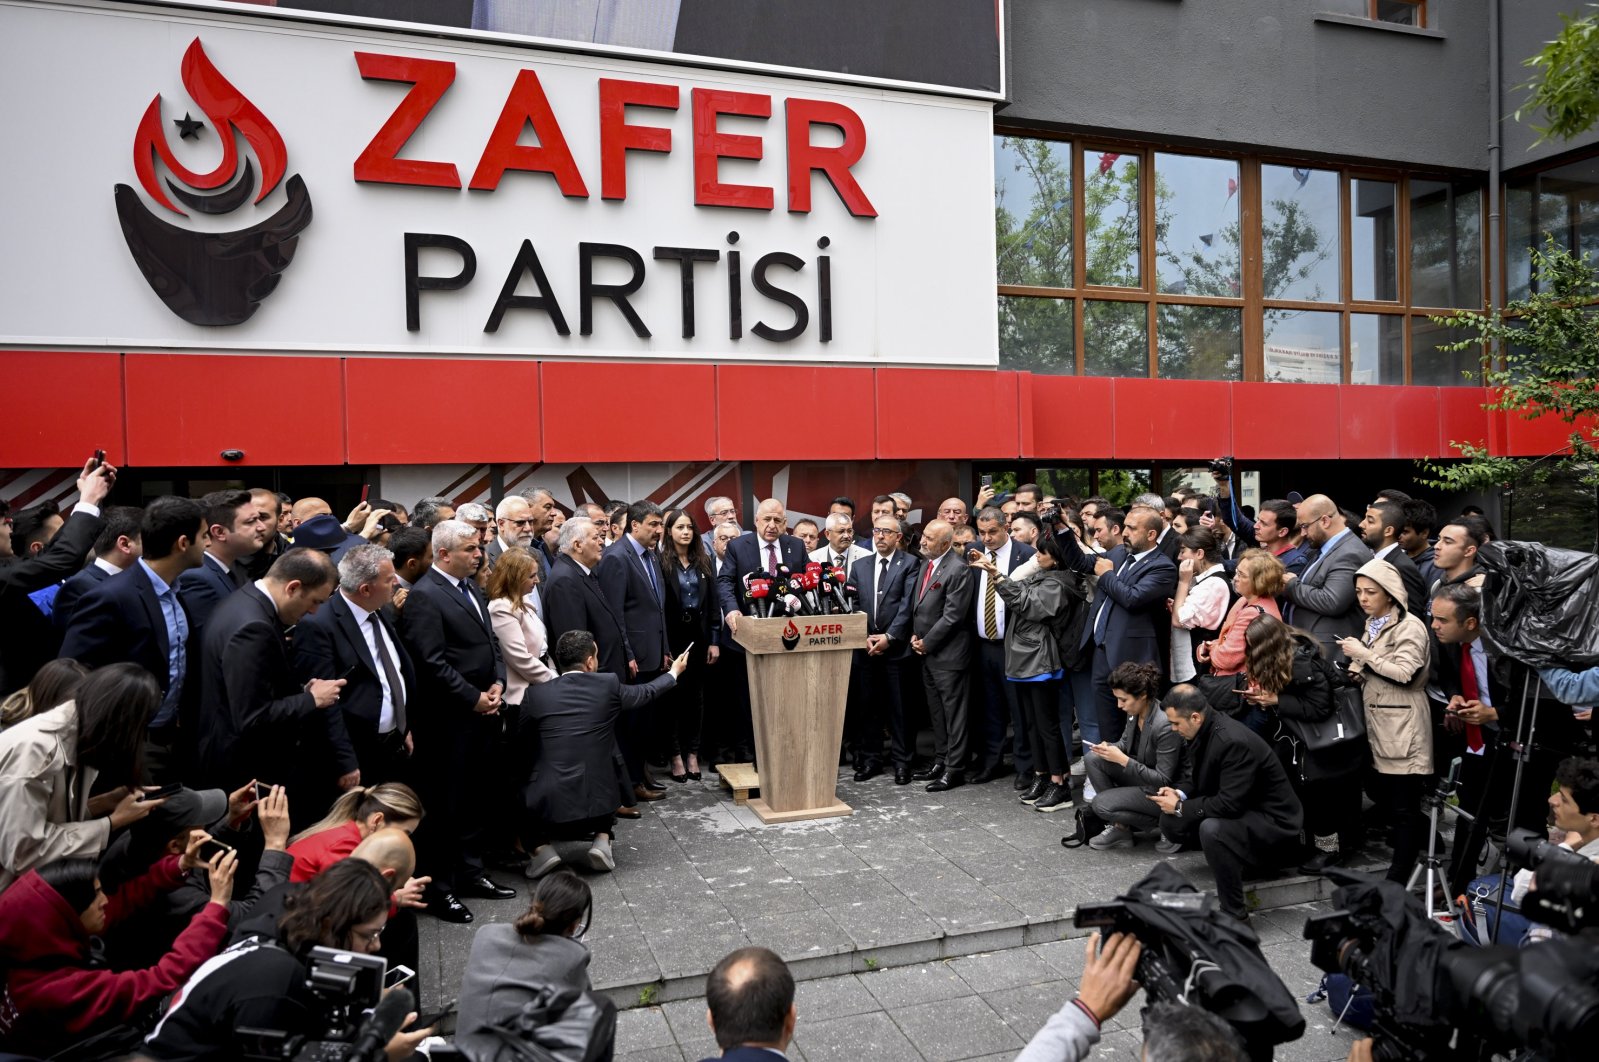 Ümit Özdağ, leader of the Victory Party (ZP), is seen during a press conference in Ankara, Türkiye, May 23, 2023 (AA Photo)